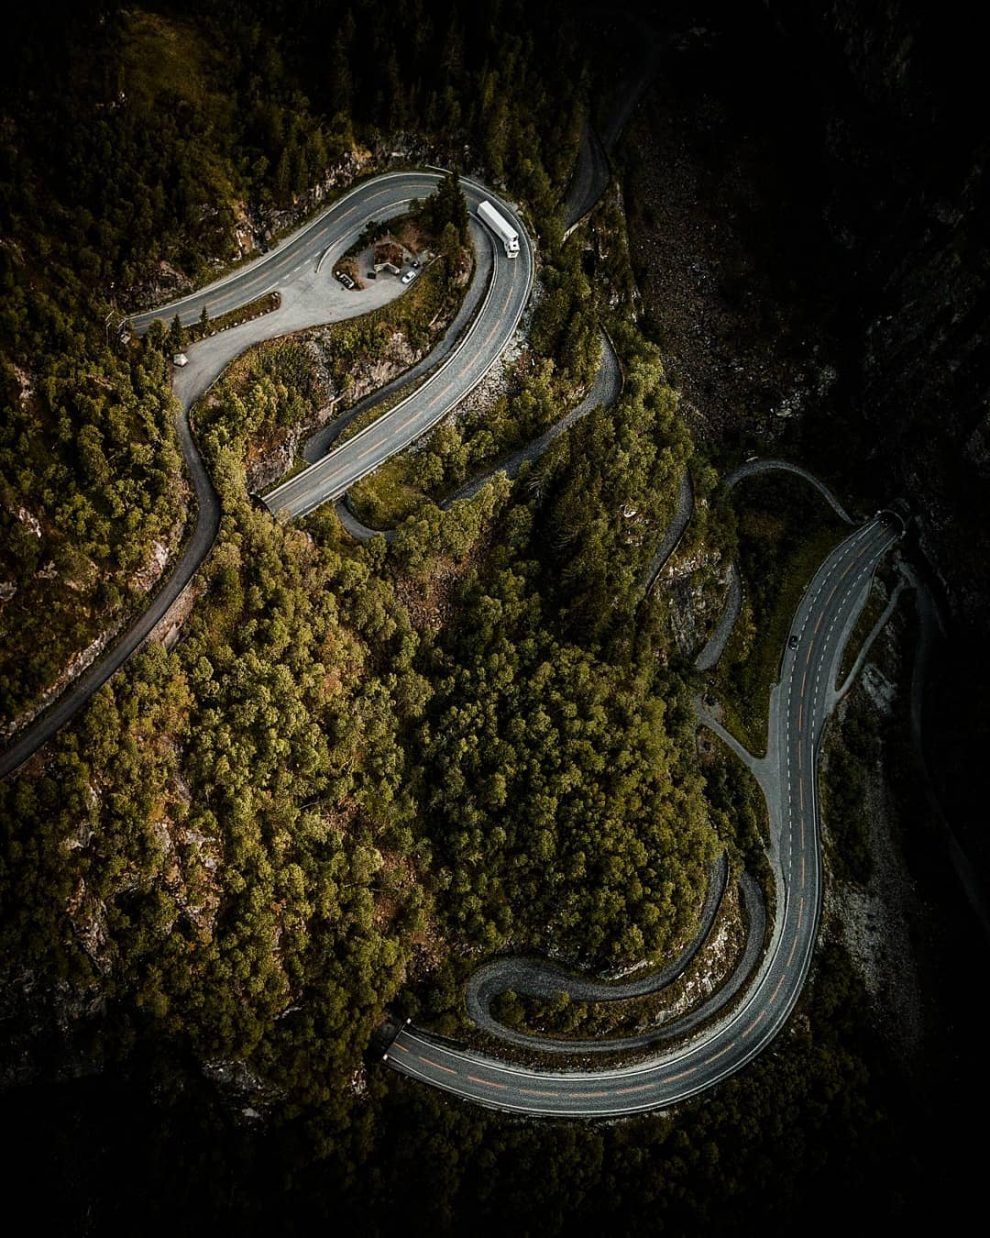 Beautiful Sweden From Above: Stunning Drone Photography By Viggo Lundberg